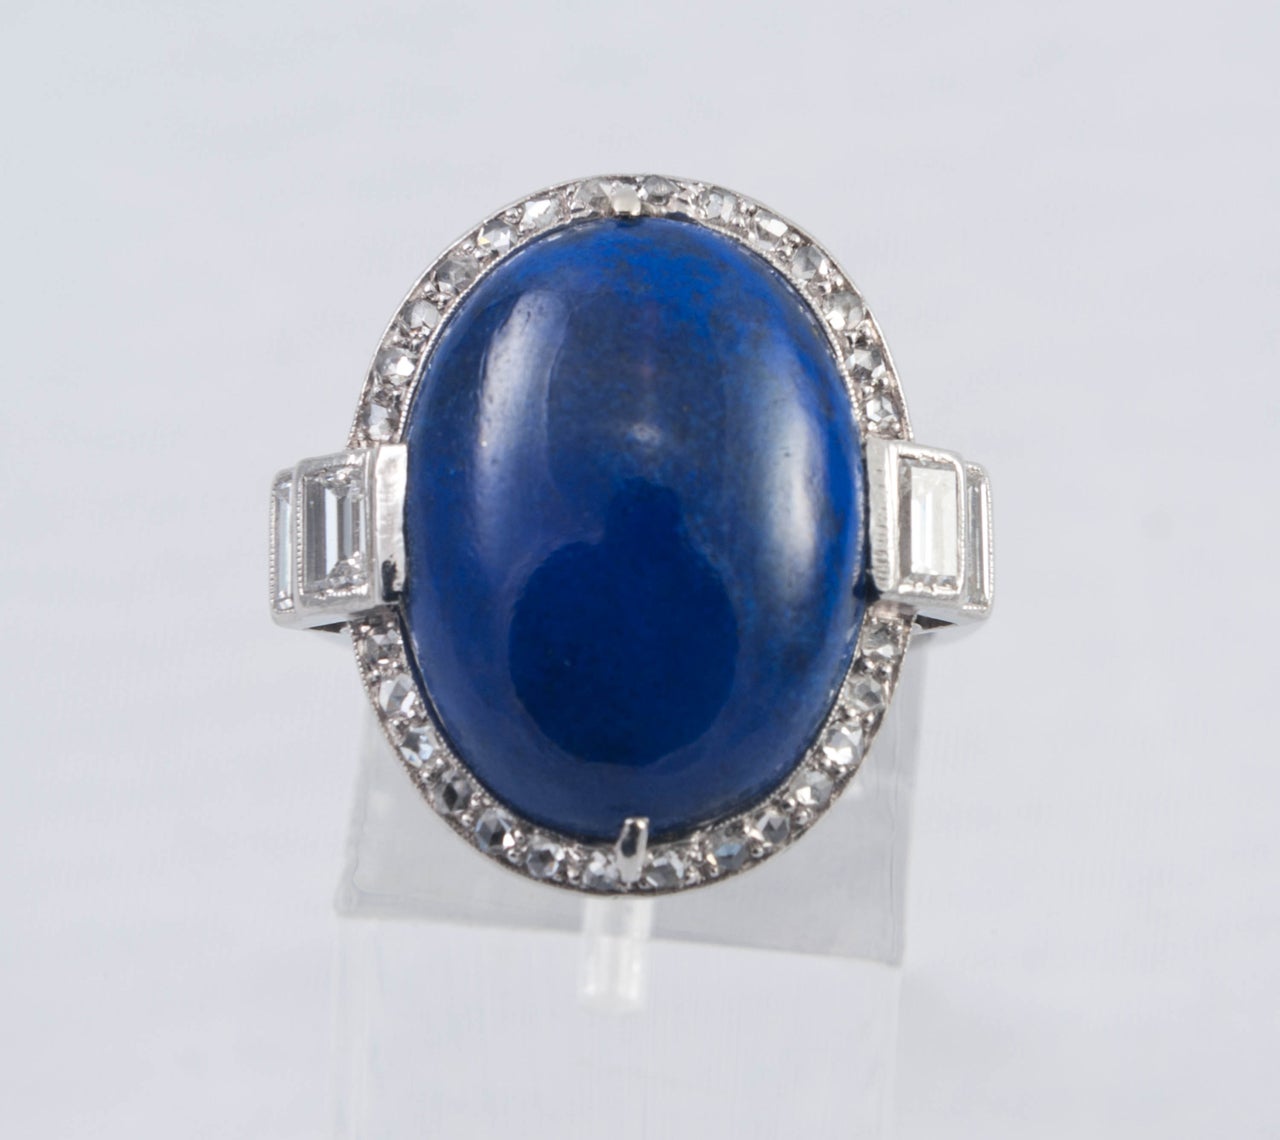 Cabouchon cut Lapis Lazuli ring surrounded by mixed cut small Diamonds and Baguettes set in Platinum ( tested ). It is engraved under the bezel with a fine reeded shank